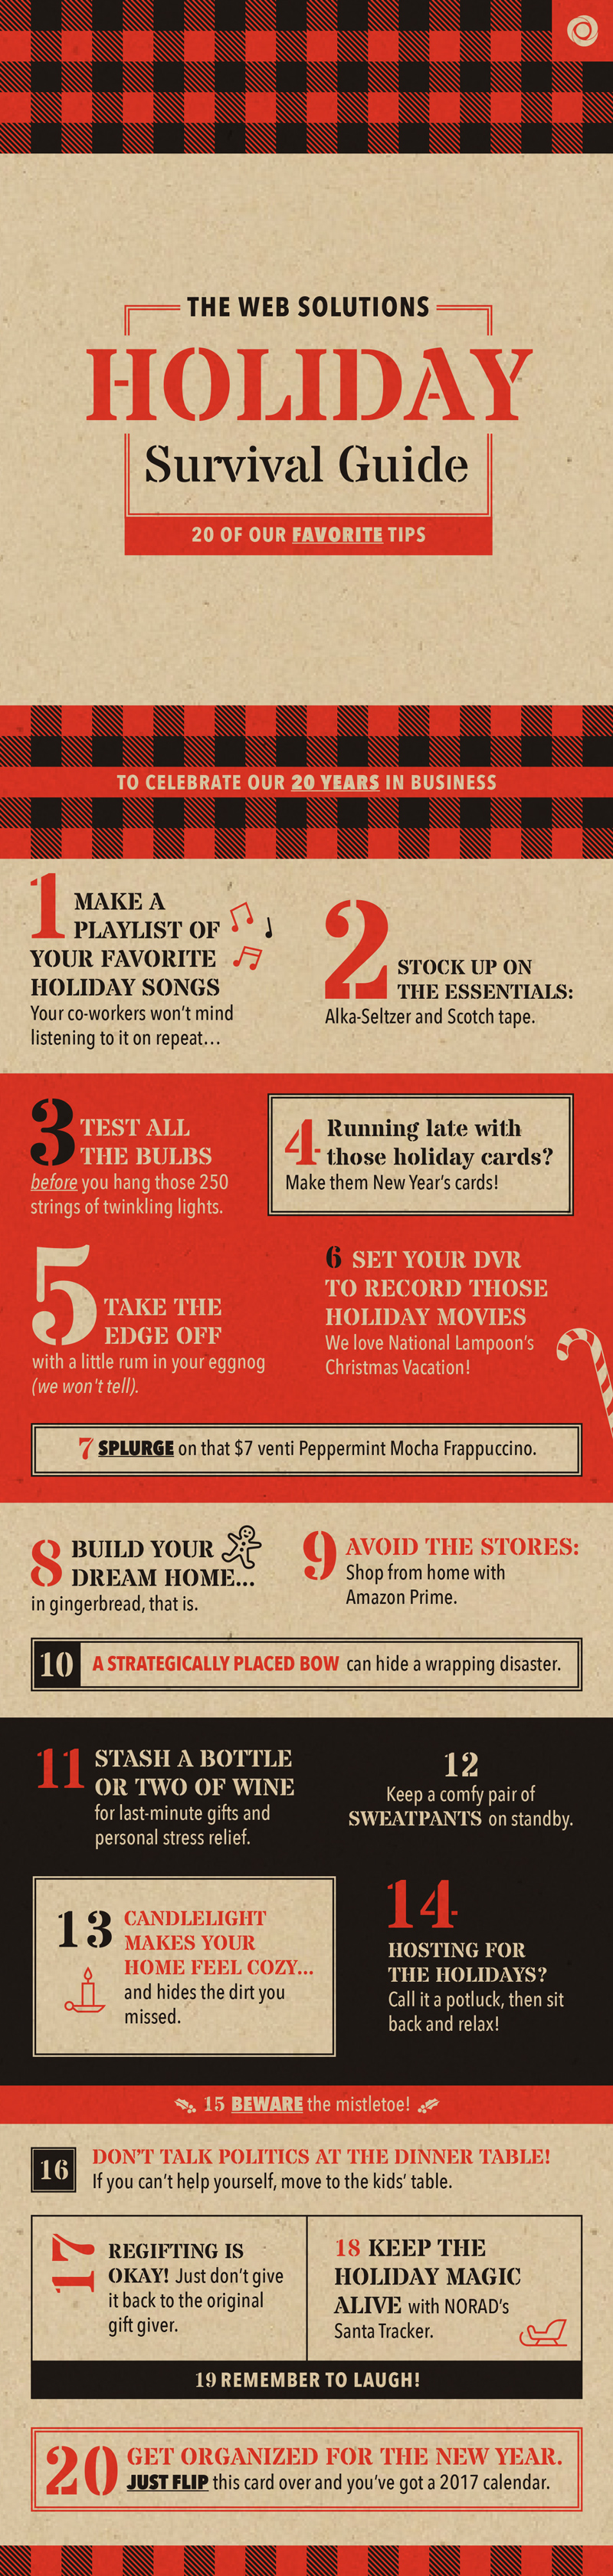 Web Solutions Holiday Survival Guide